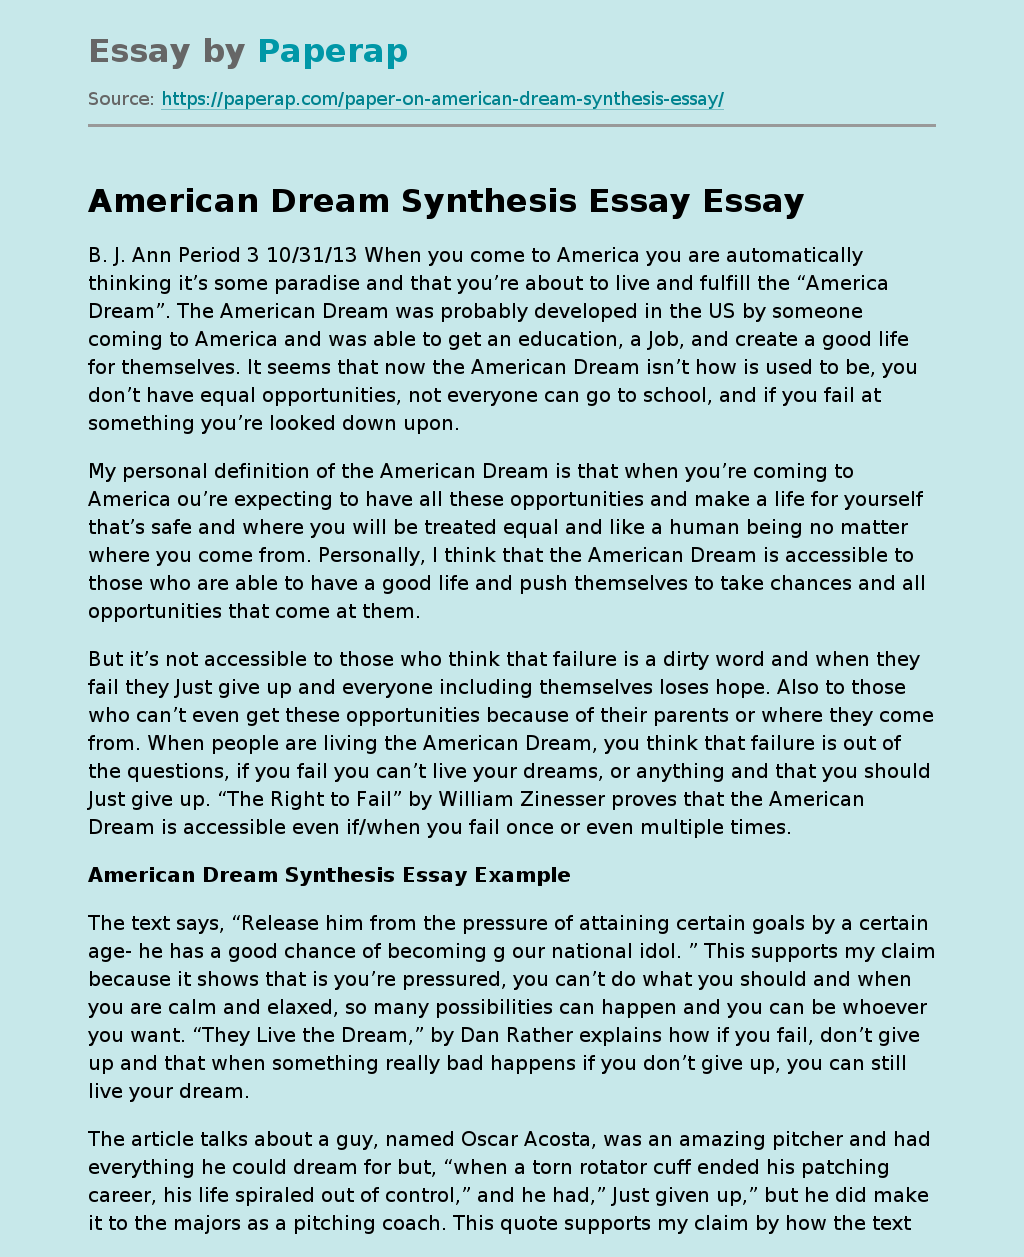 American Dream Synthesis Essay